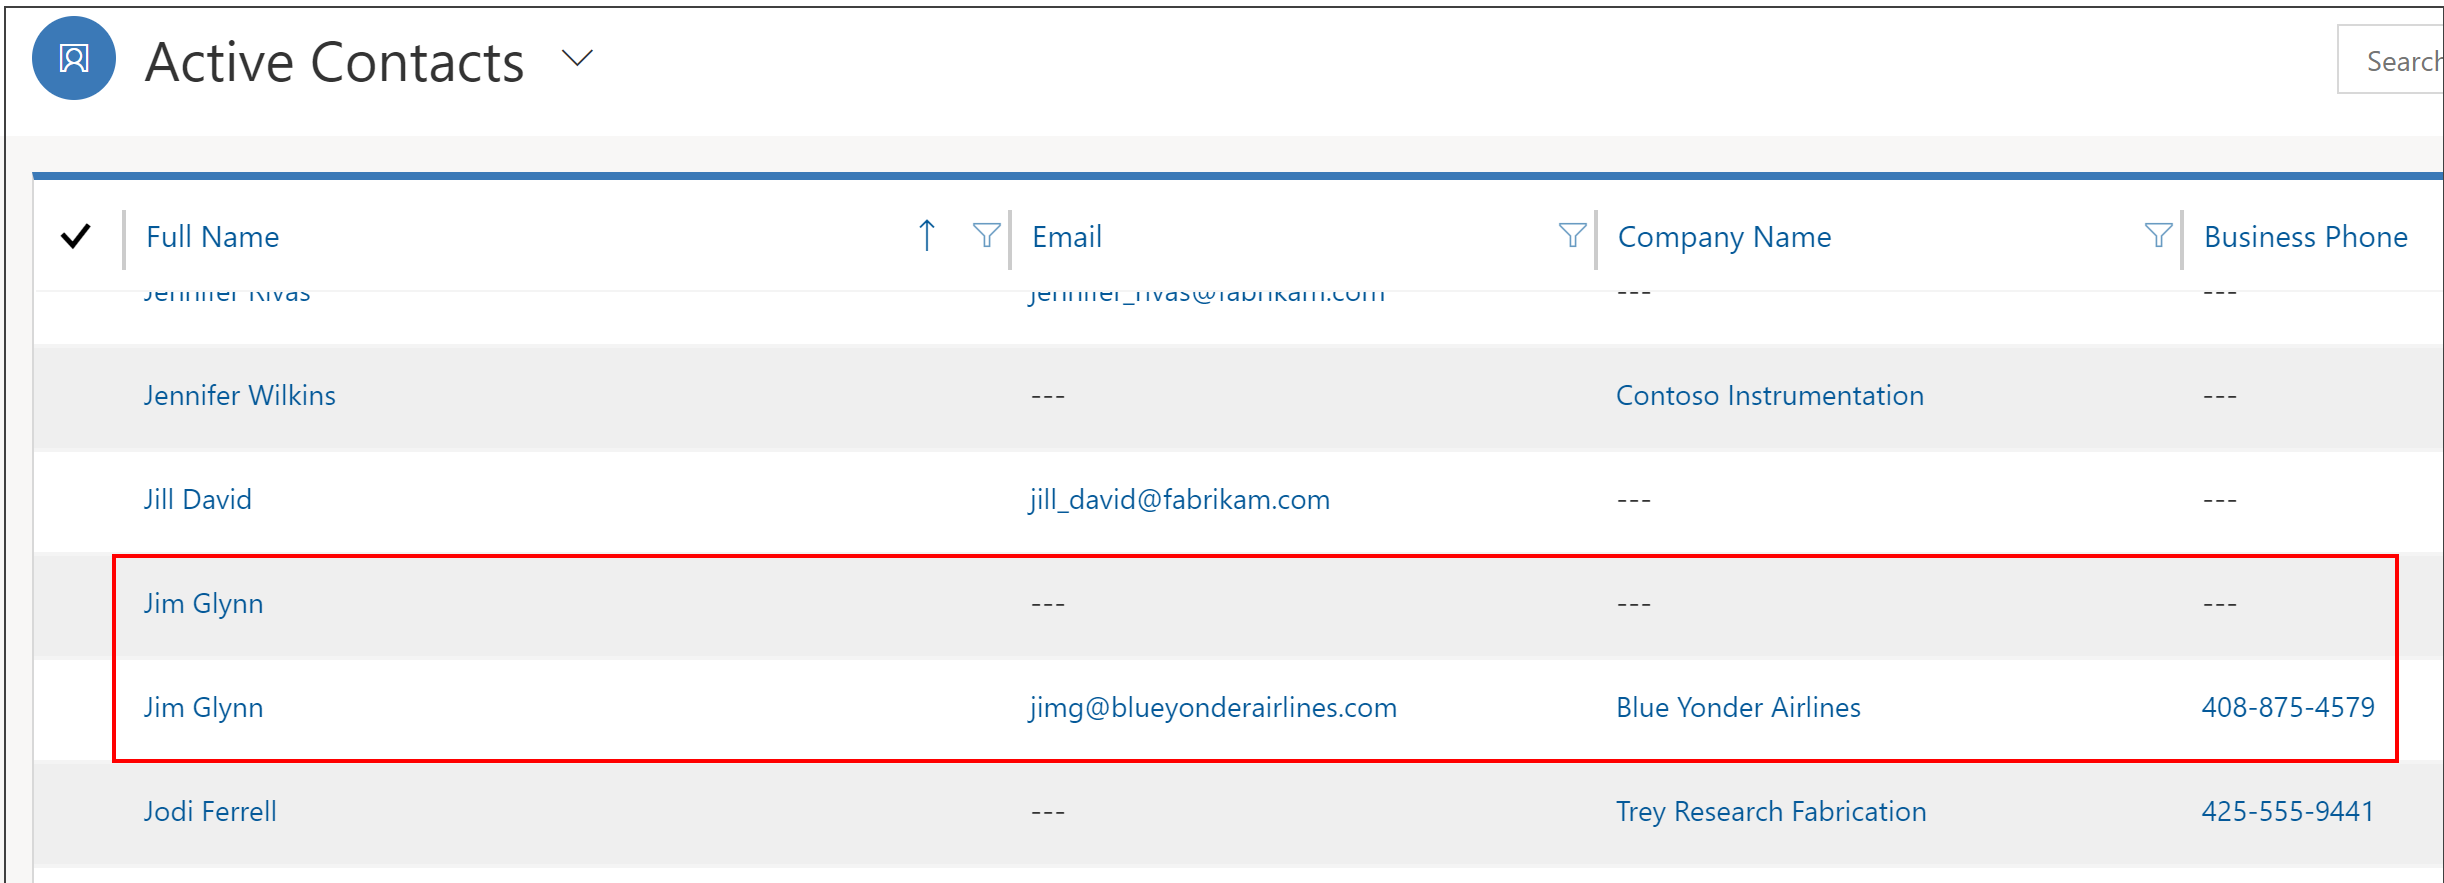 Duplicate contacts listed in the My Active Contacts list in Dynamics 365 Customer Engagement (on-premises).